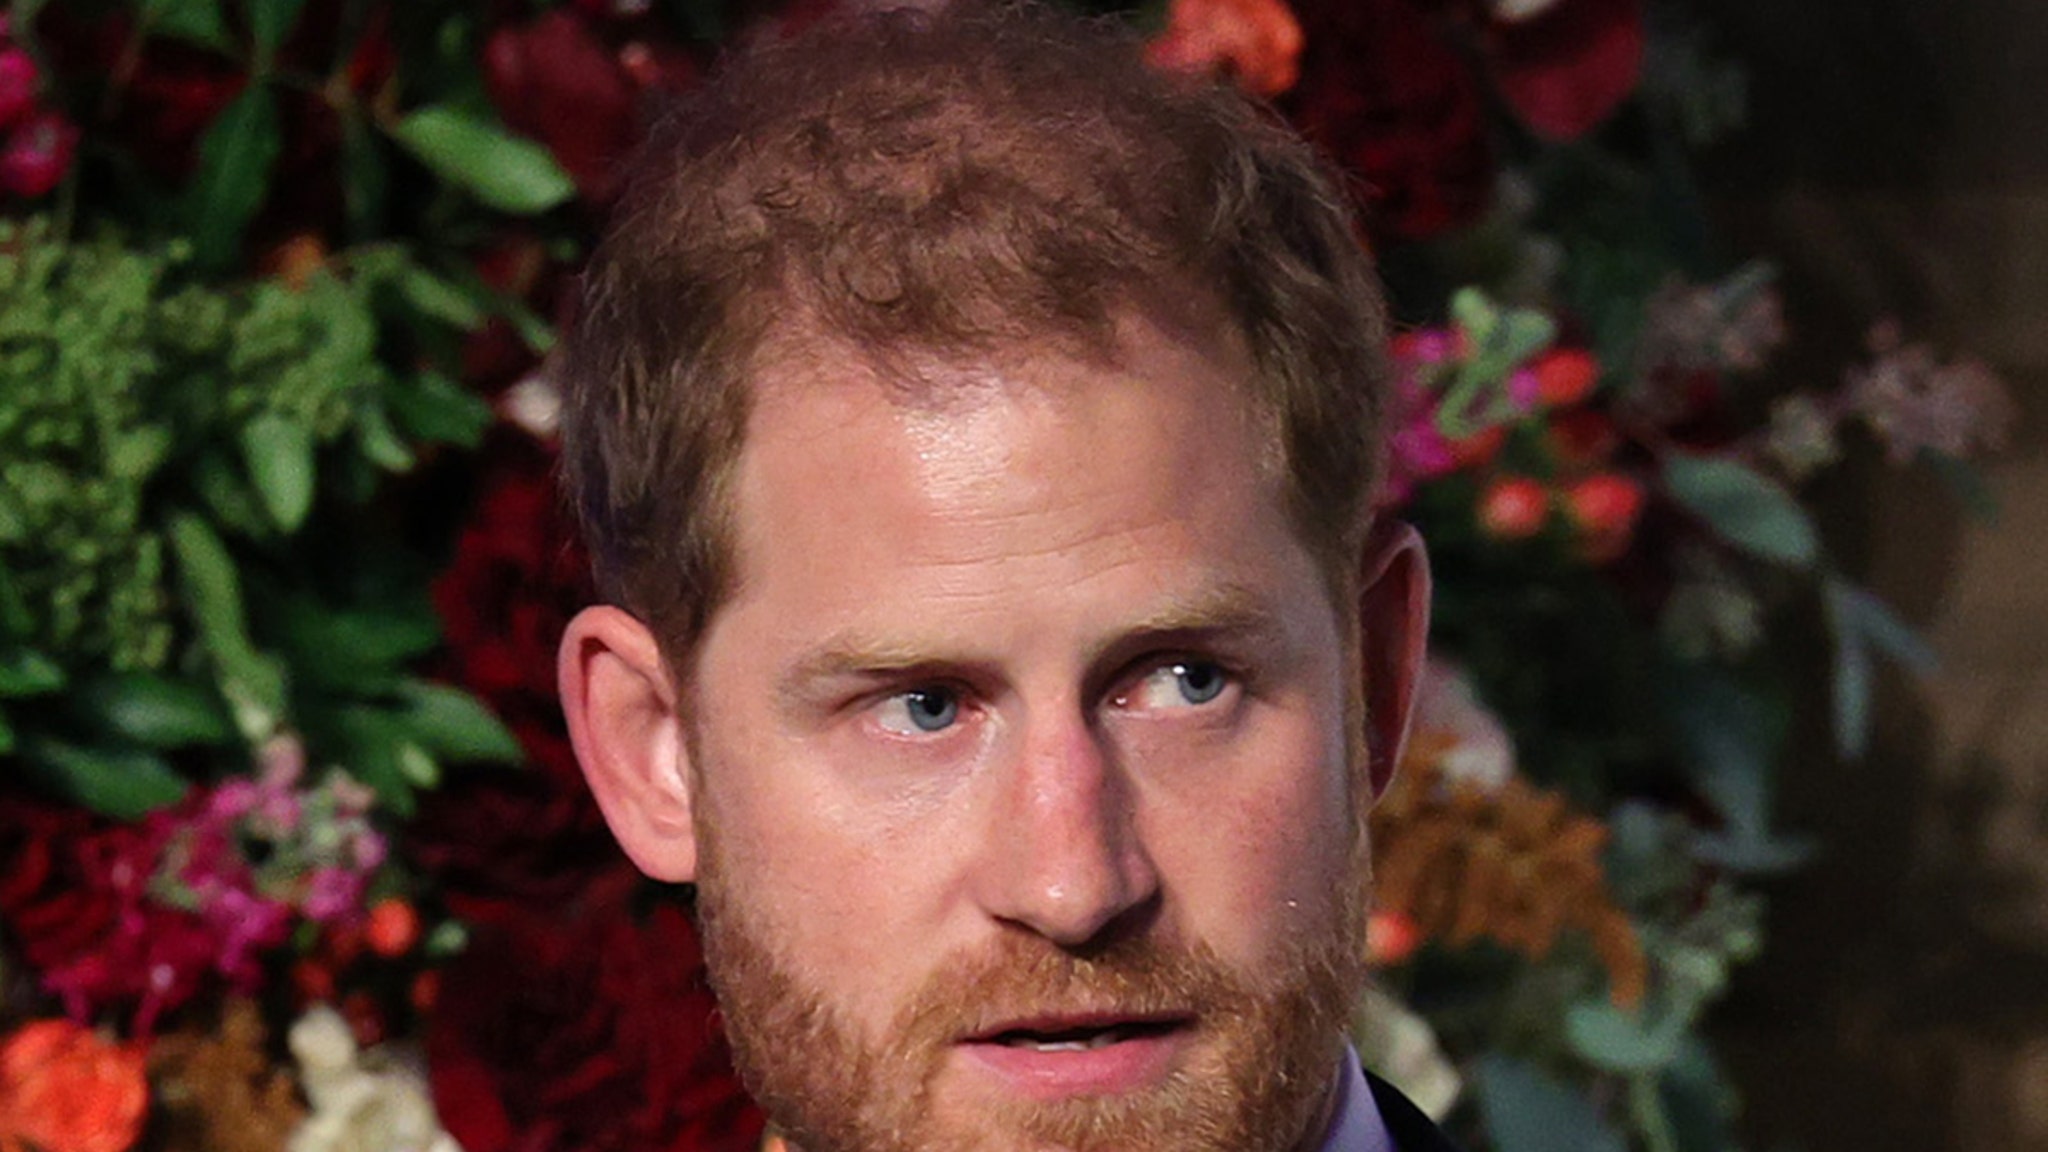 Prince Harry Threatens Legal Action After Being Denied Security in U.K.